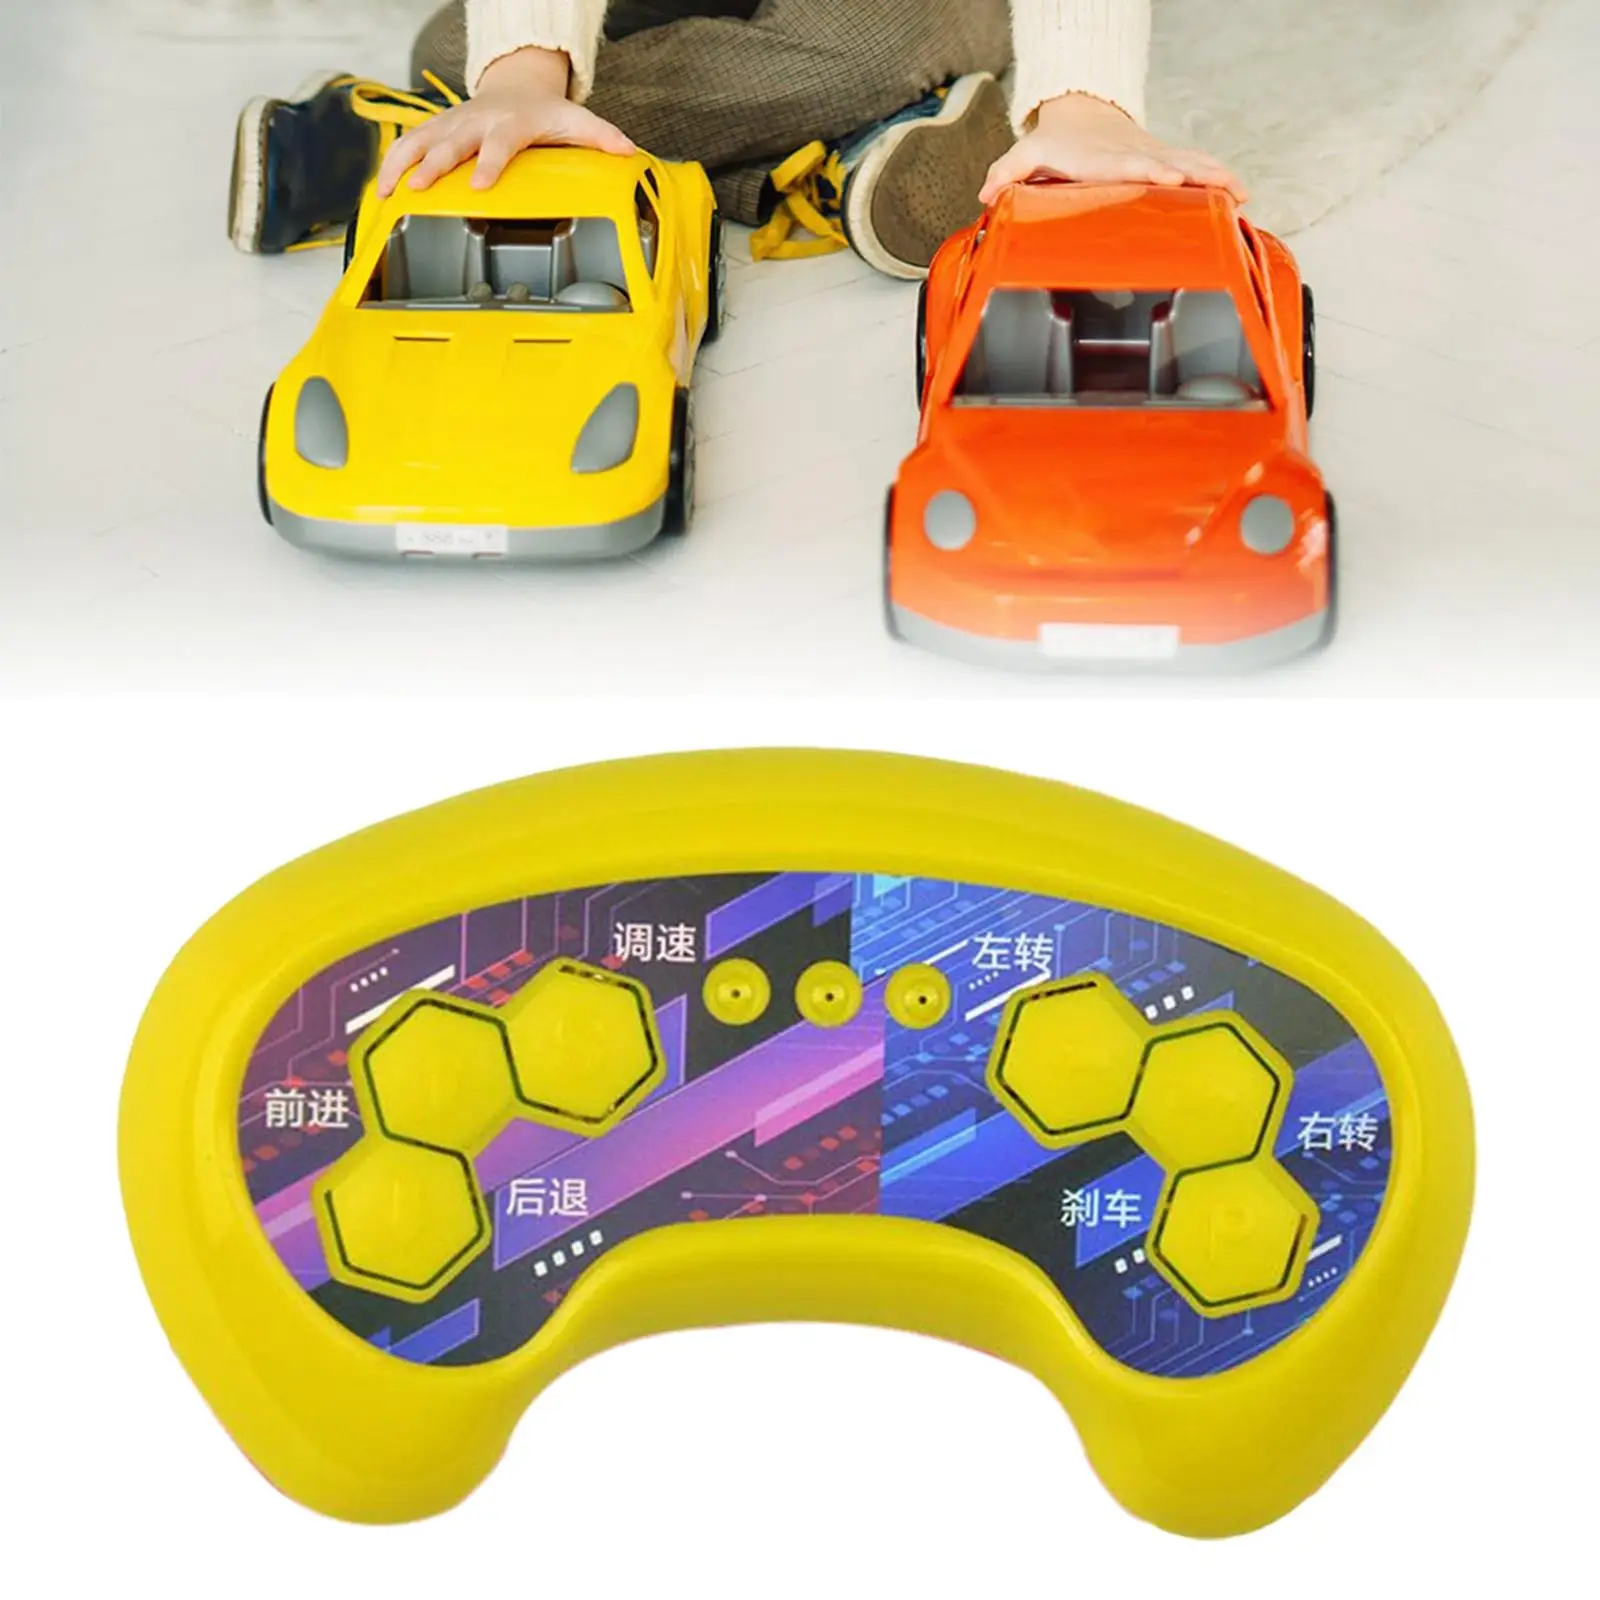 Electric Car 2.4G Bluetooth Remote Control Kids Children Gift 6V Toy for Hh-Ph360K-Rx Children Electric Riding Car Accessories